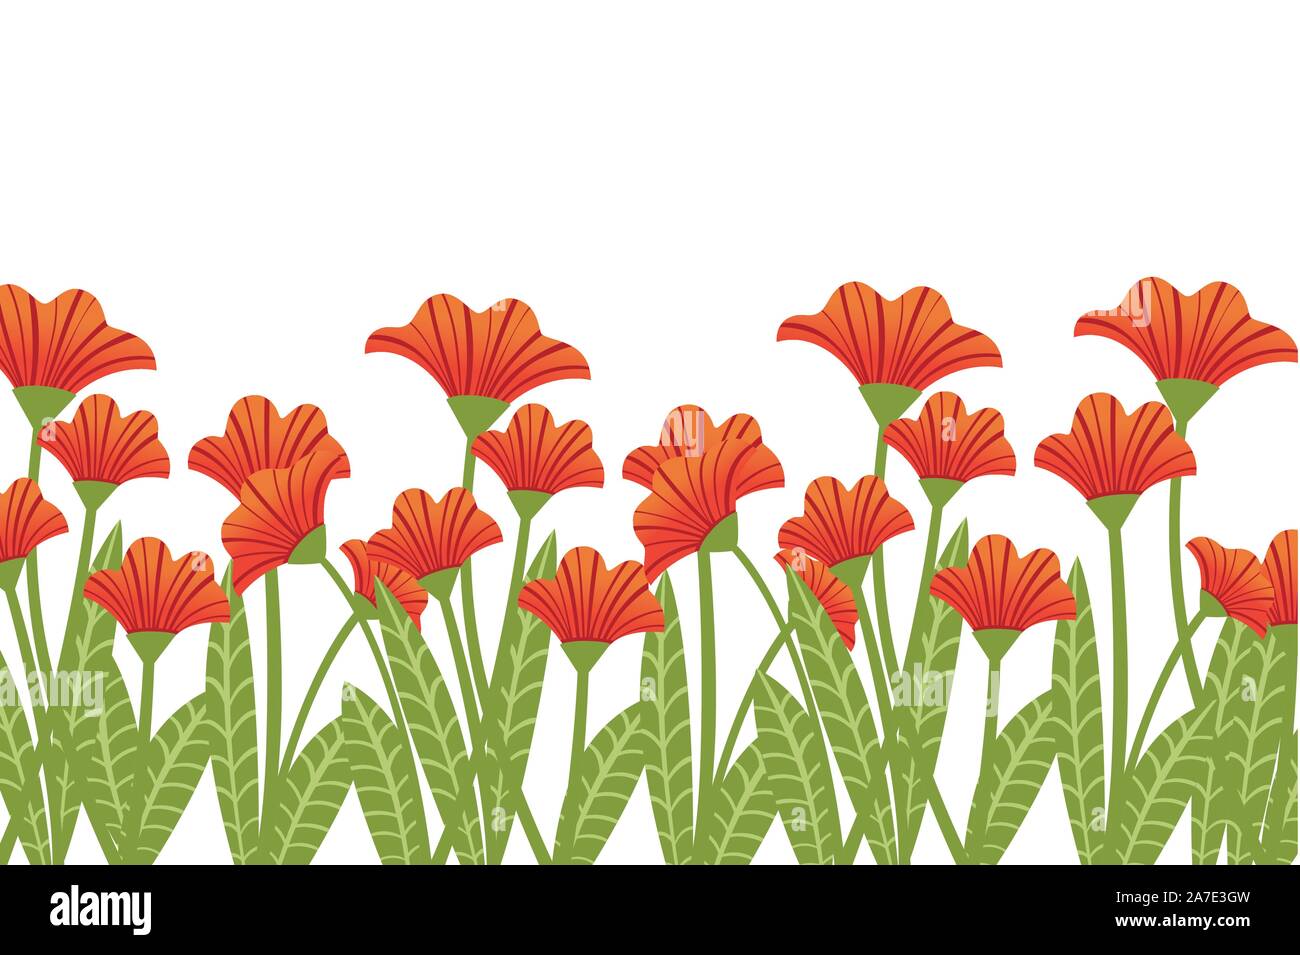 Red poppies in a row plant of red flowers flat vector illustration on white background. Stock Vector